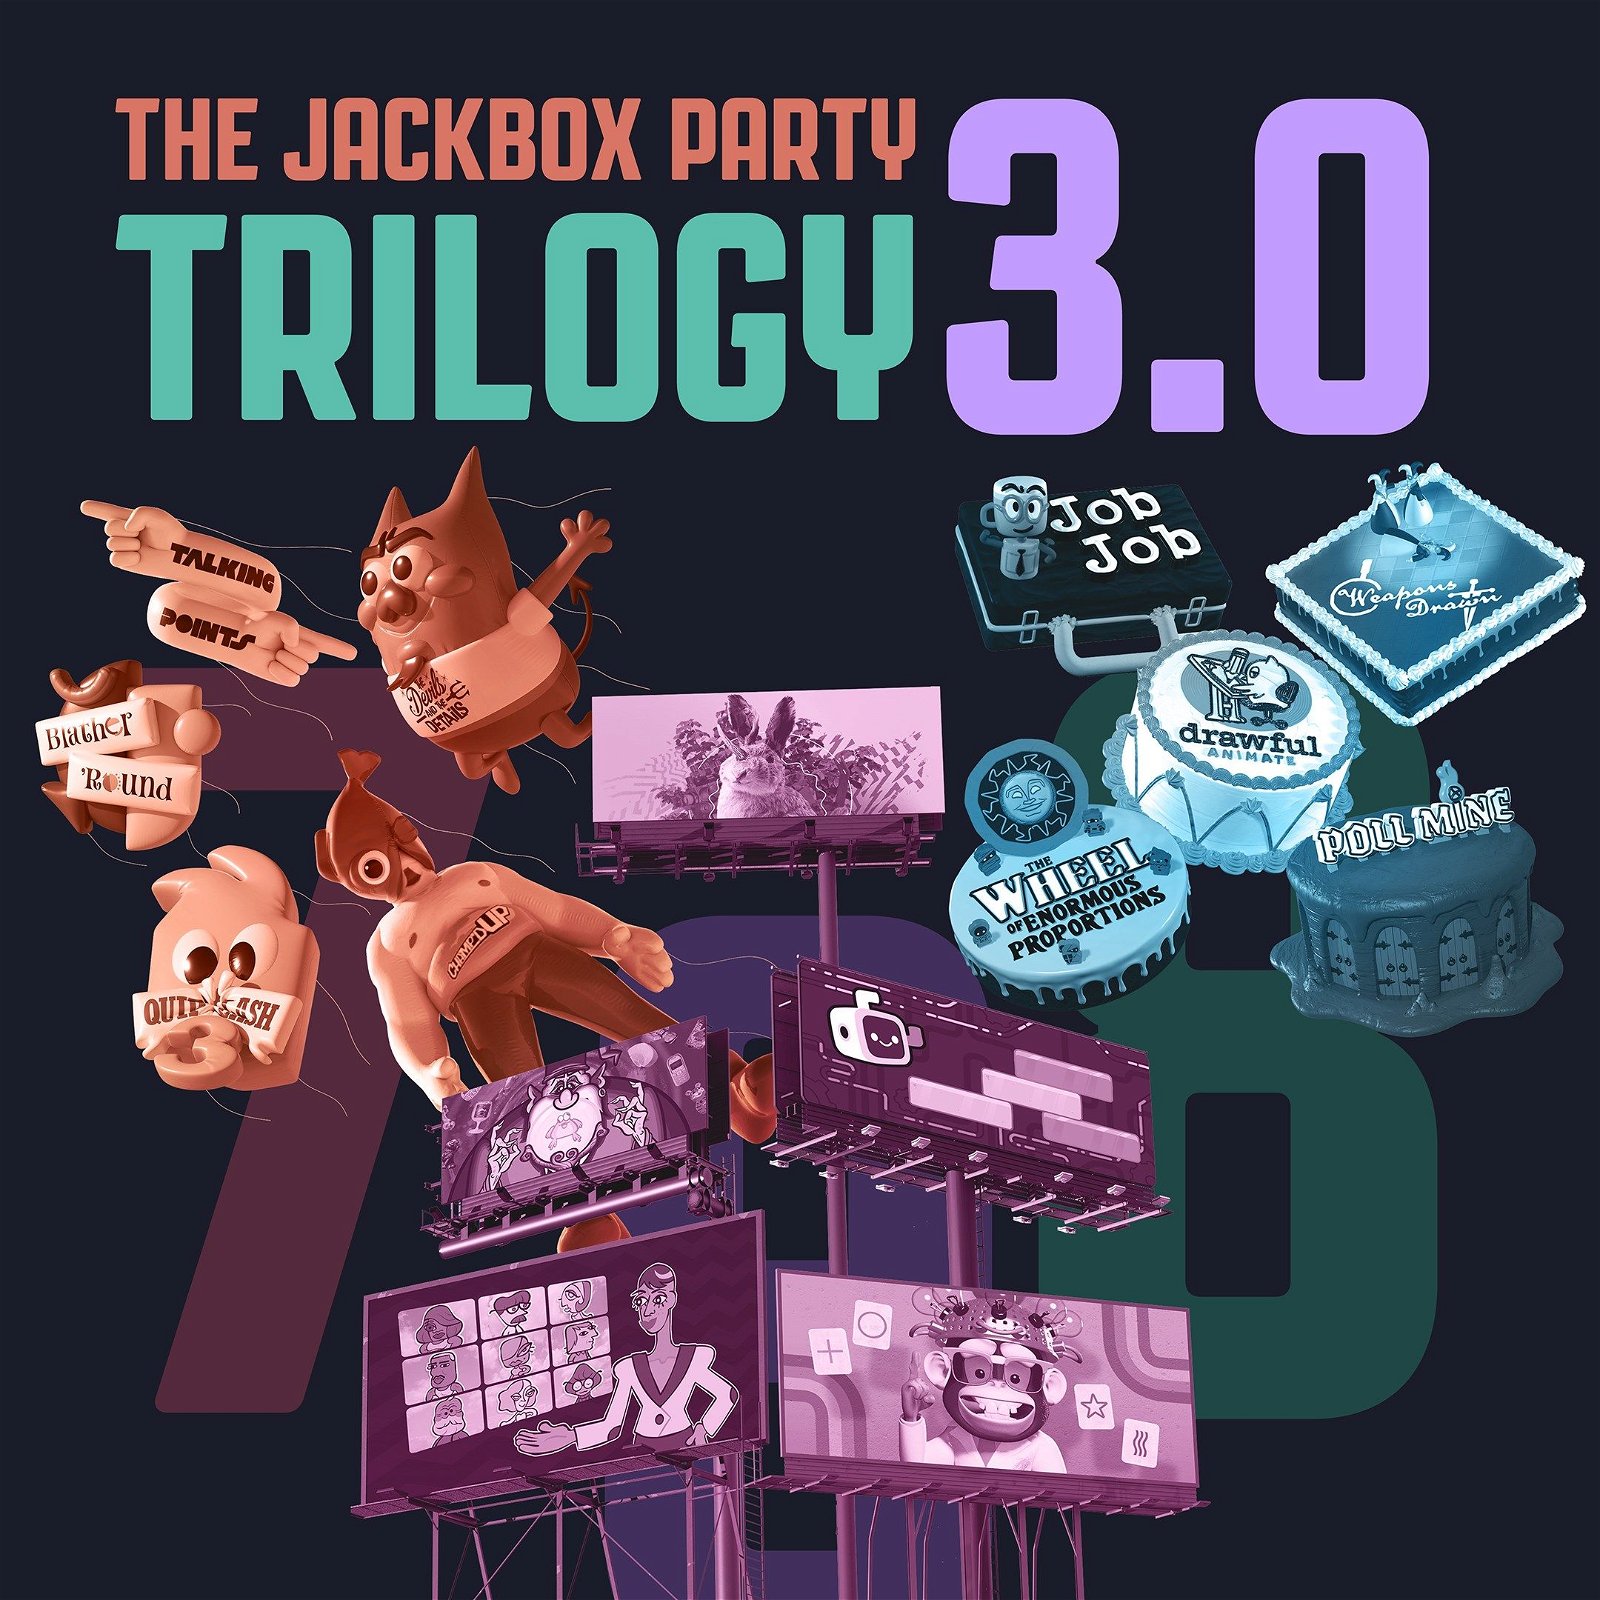 Image of The Jackbox Party Trilogy 3.0